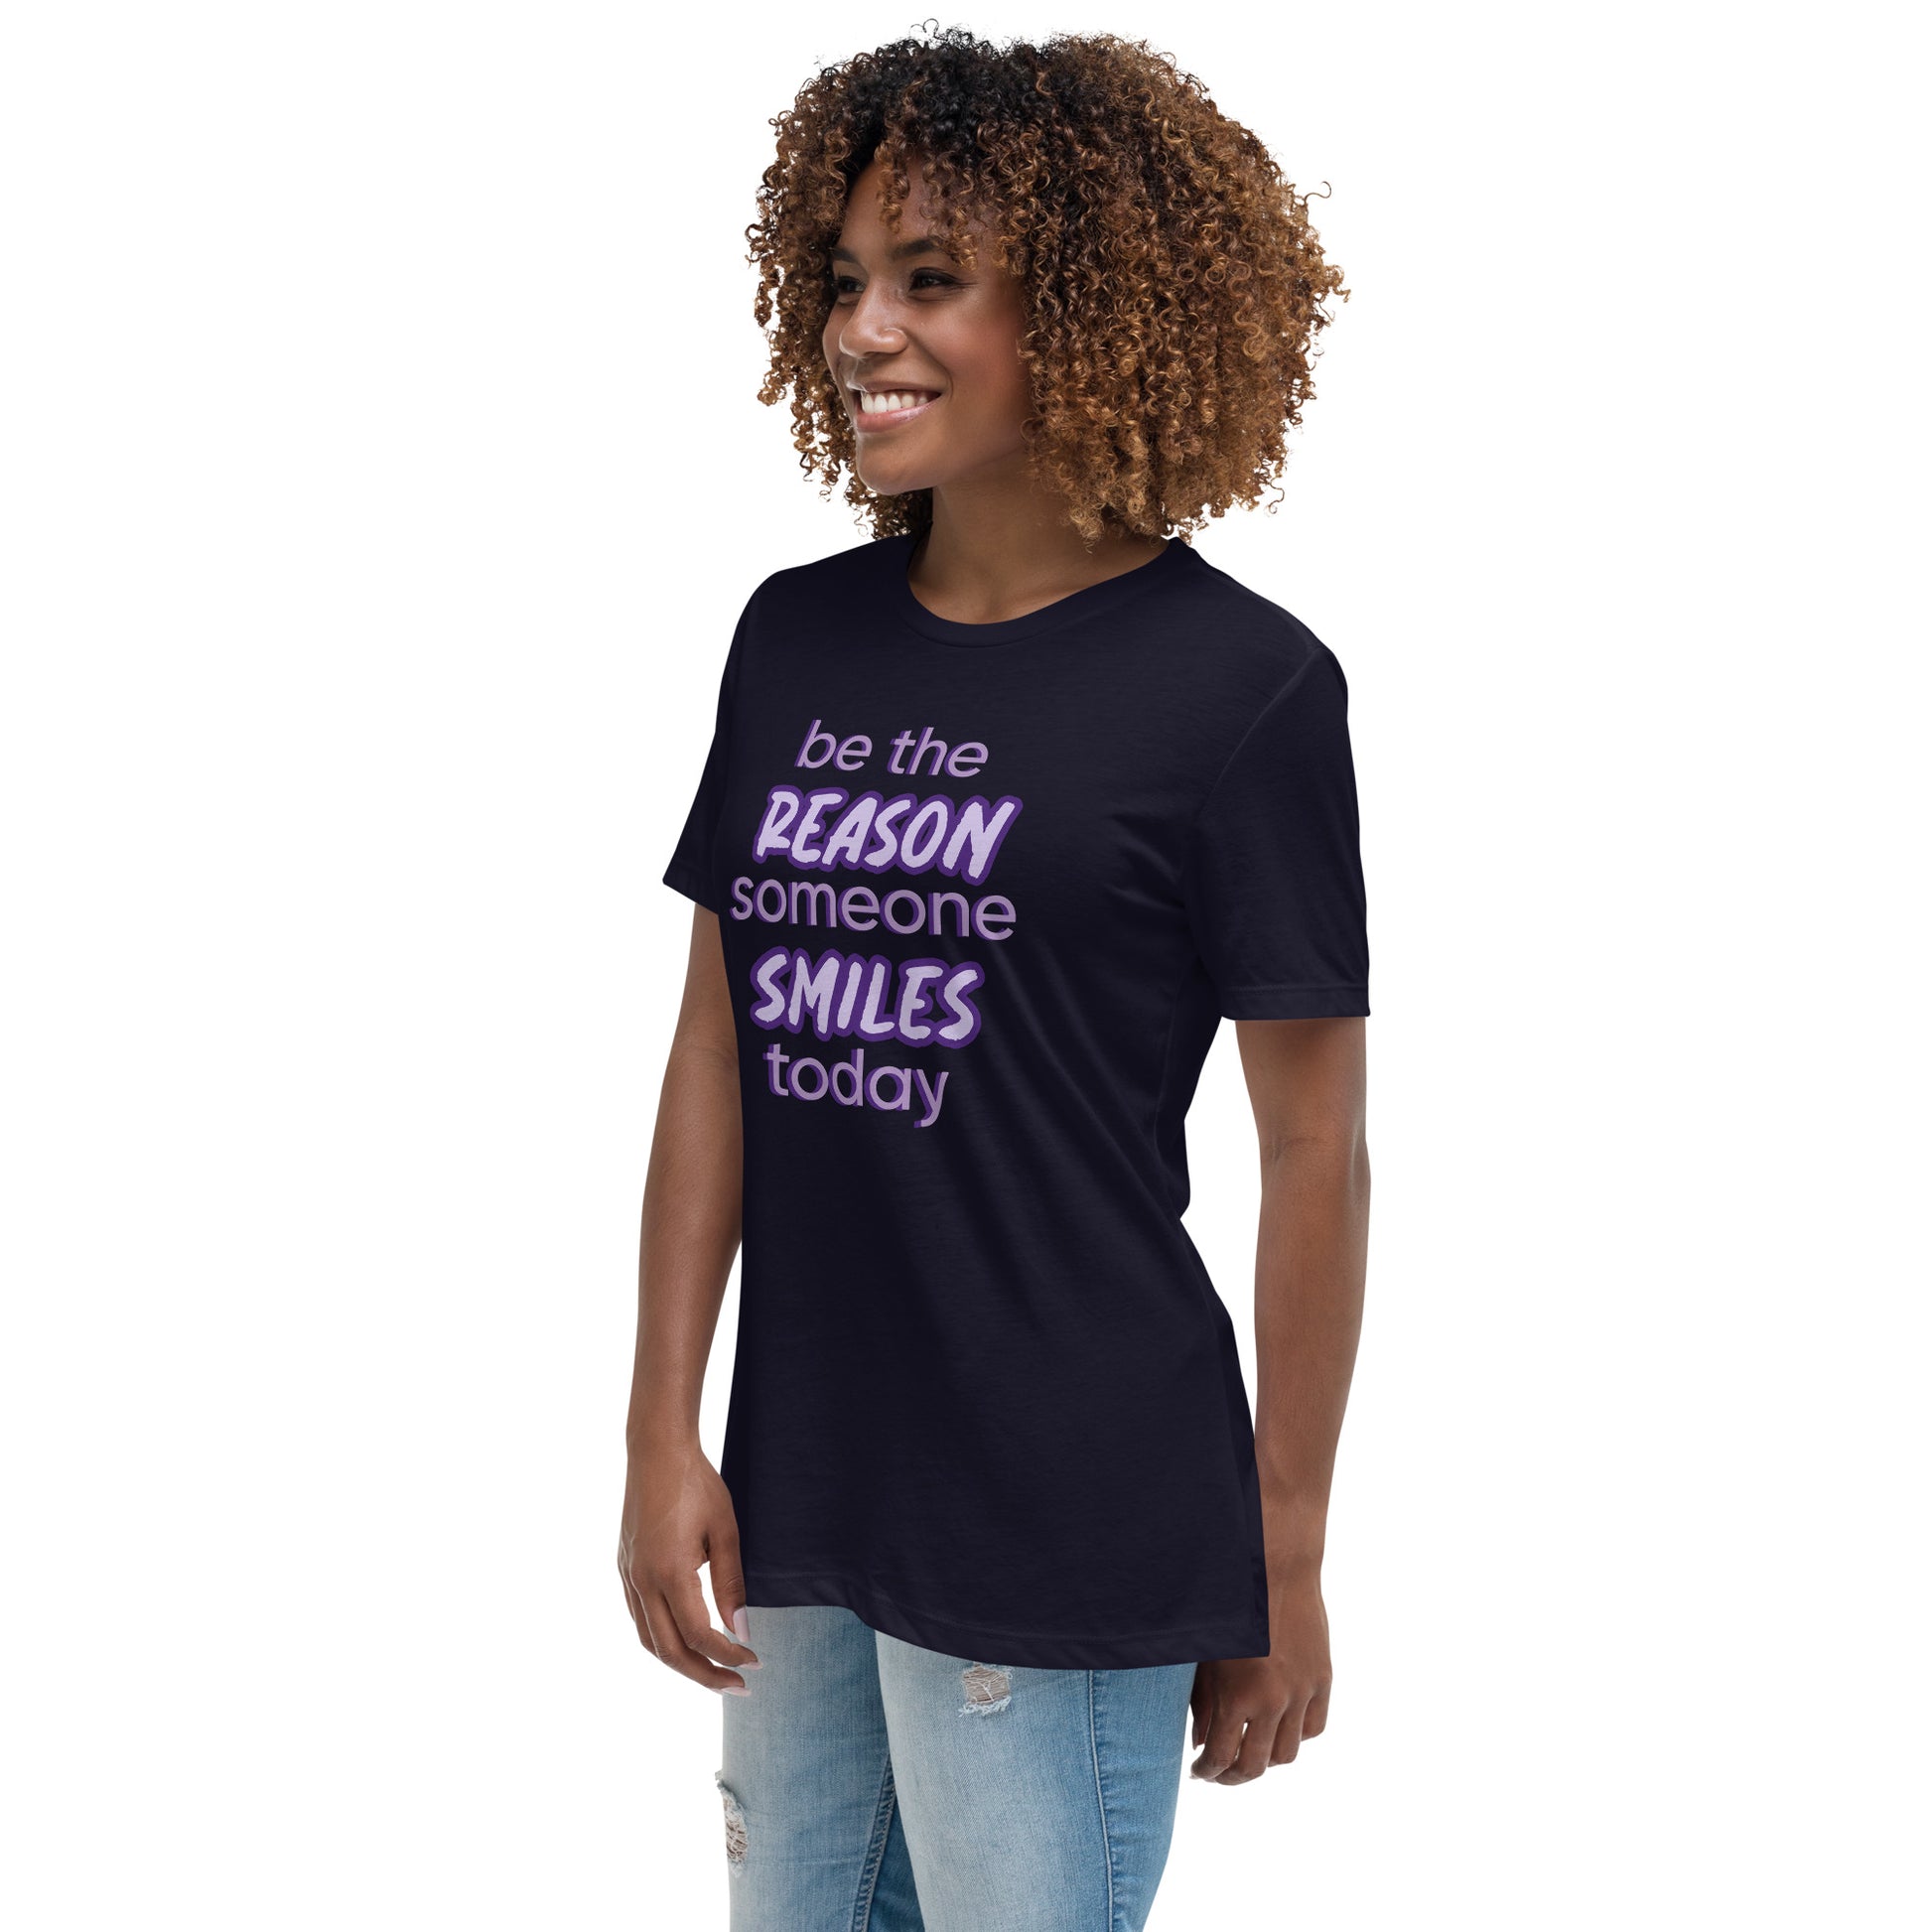 Woman with navy T-shirt and the quote "be the reason someone smiles today" in purple on it. 